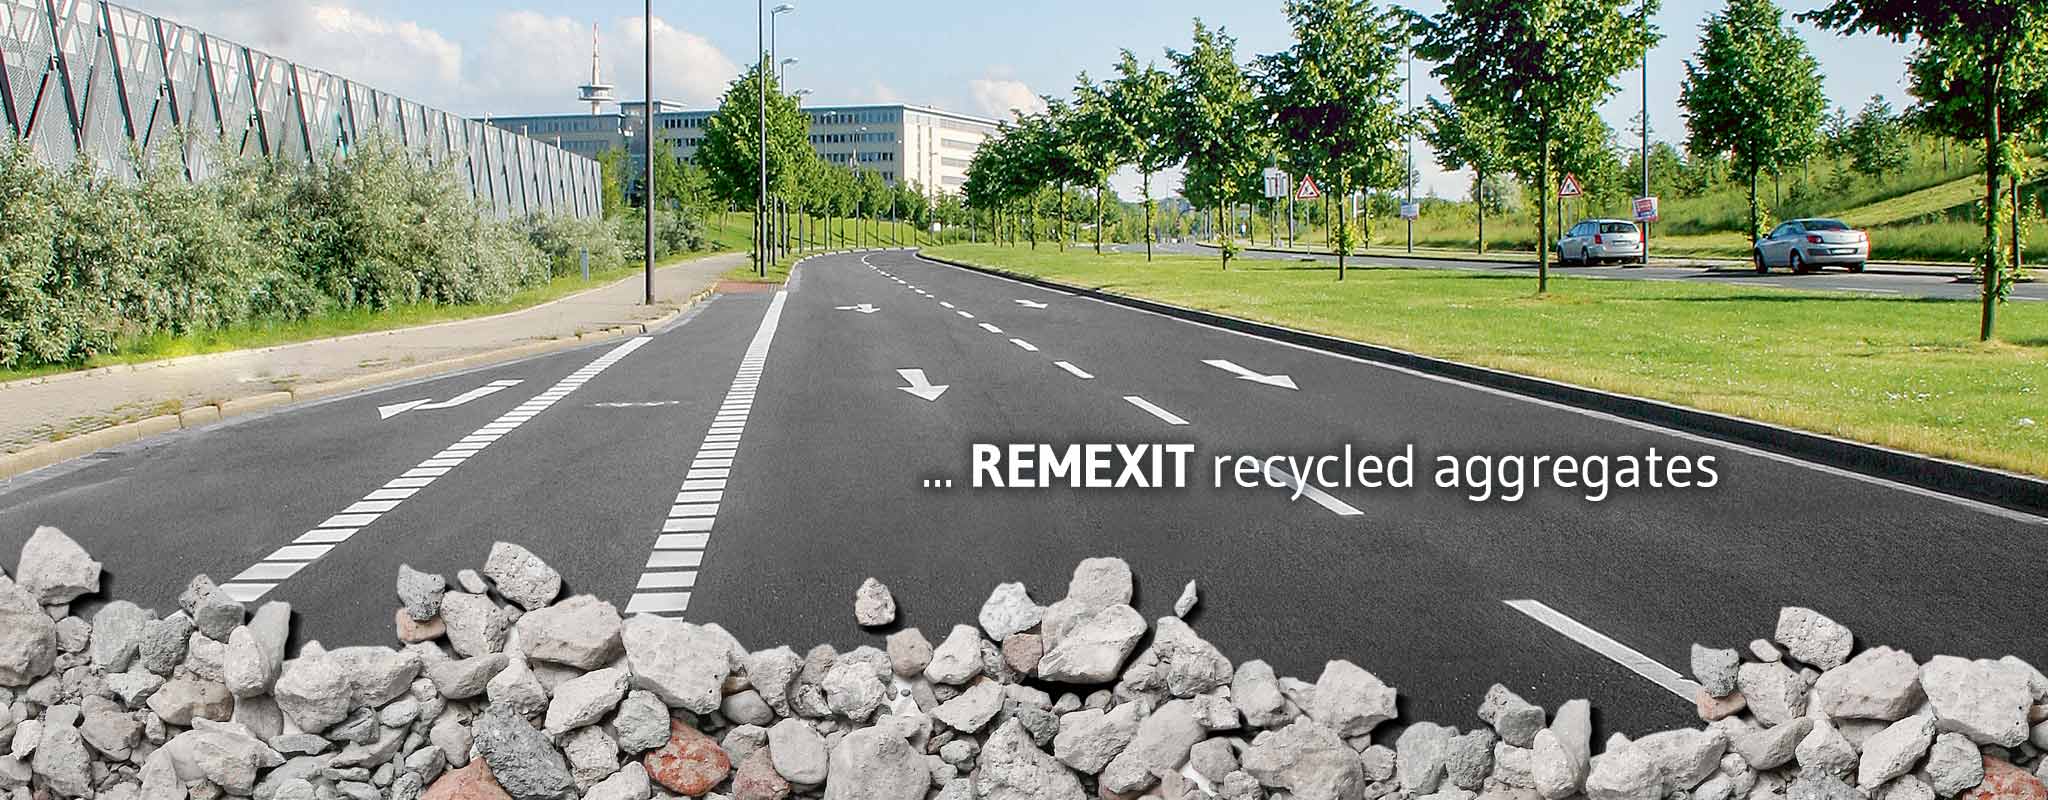 Mineral alternatives from CDM waste: recycled aggregates remexit® rx_sol_home-slide_E_remexit_EN_01b.jpg